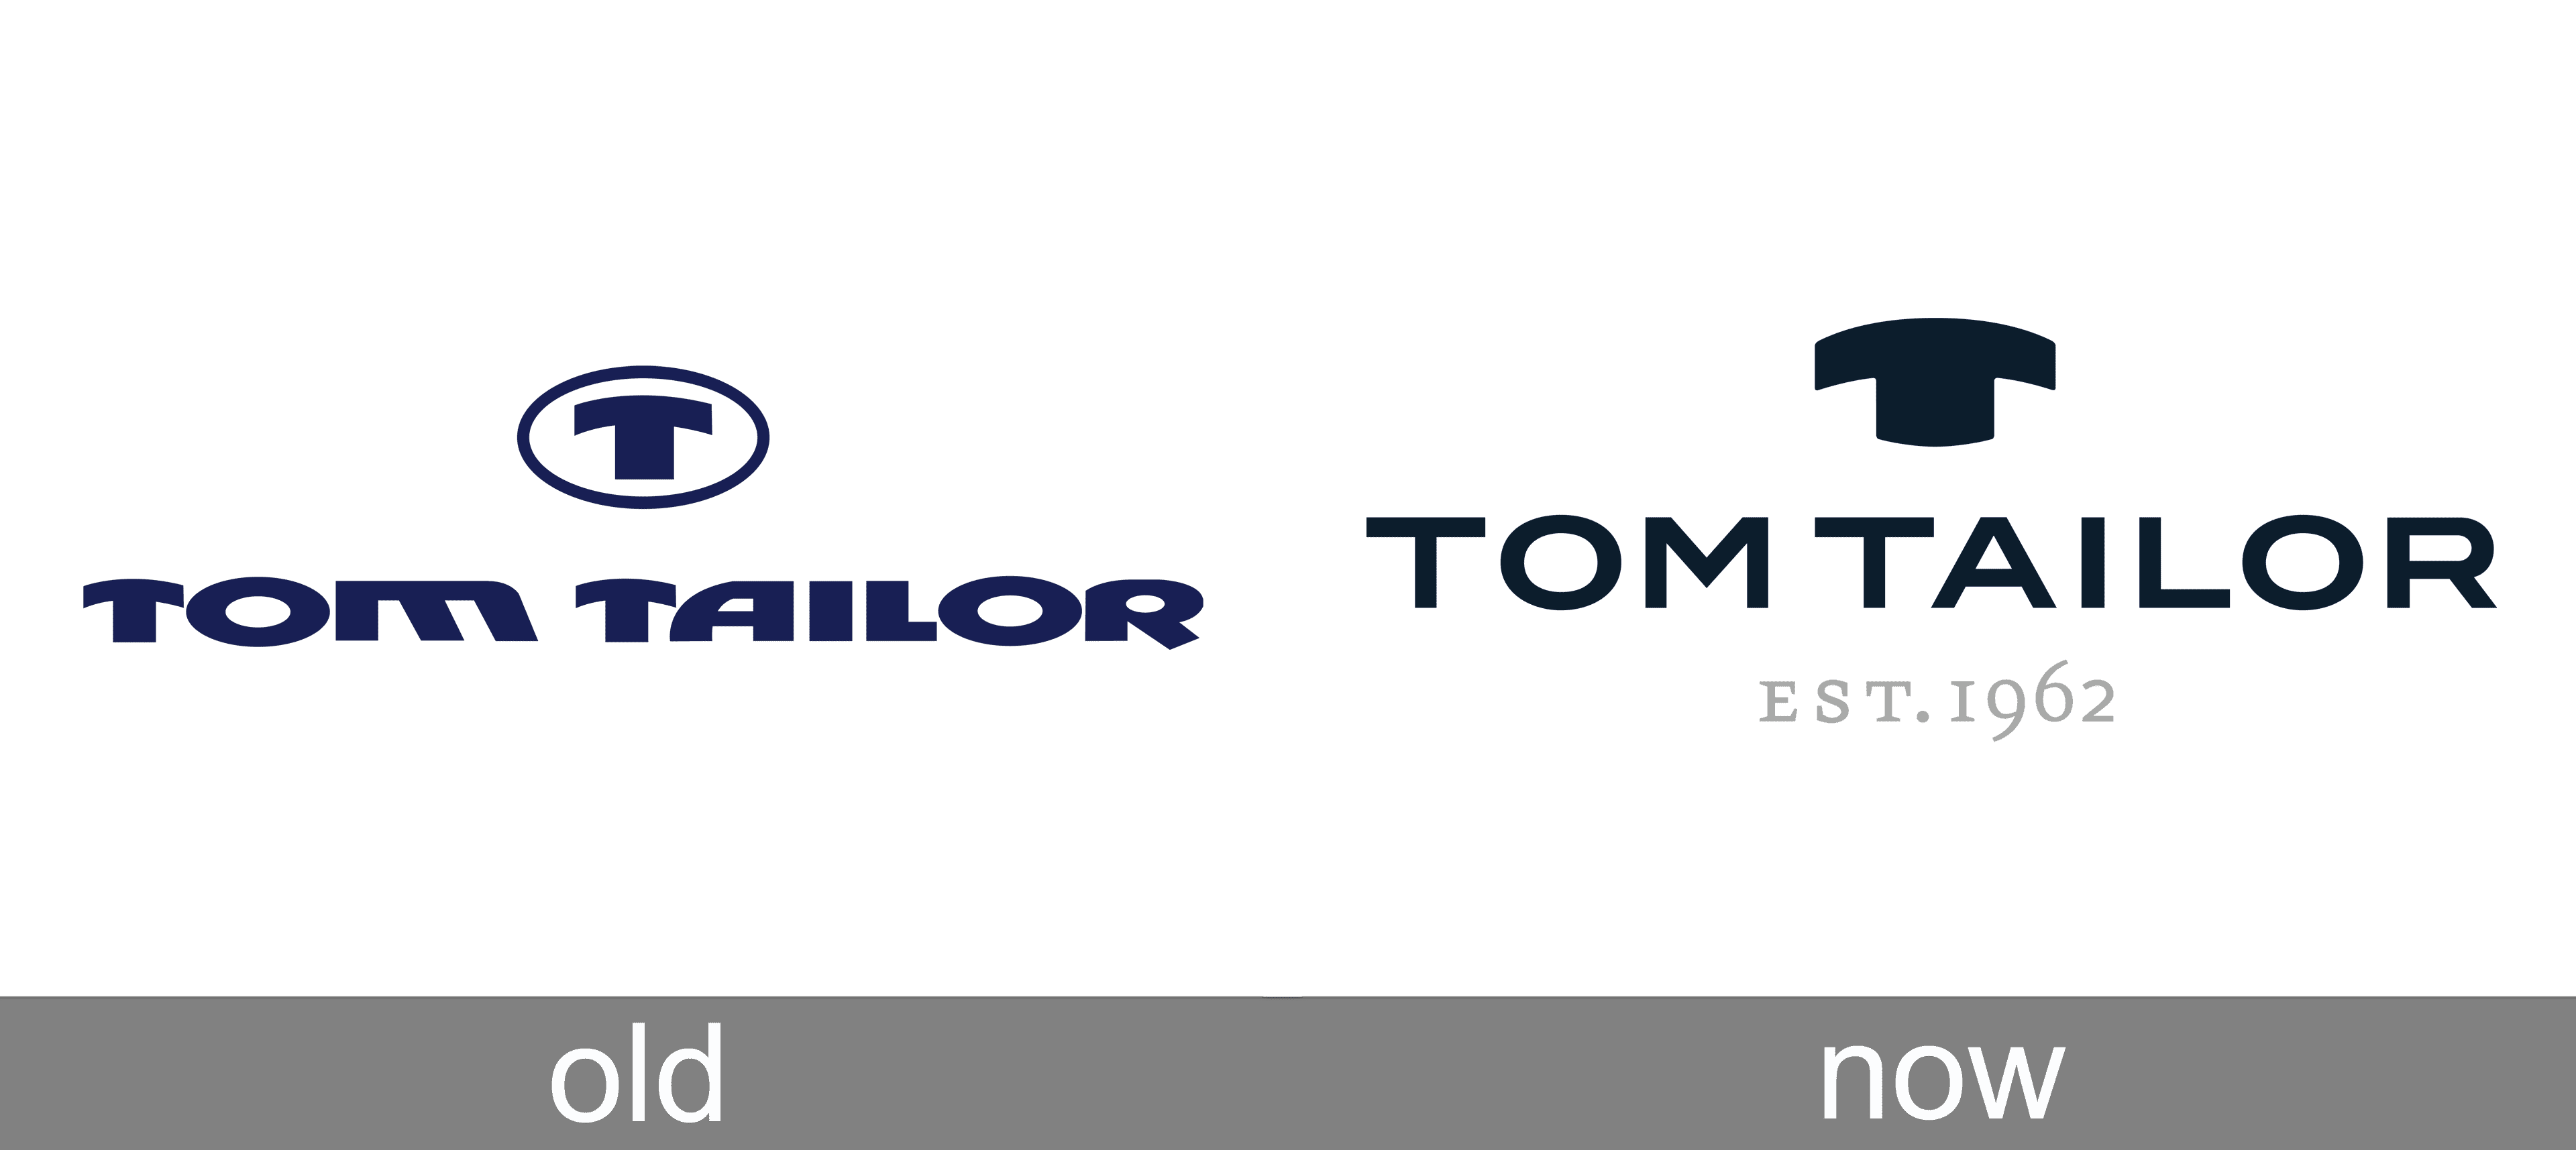 history, Logo and brand symbol, Tom PNG, meaning, Tailor